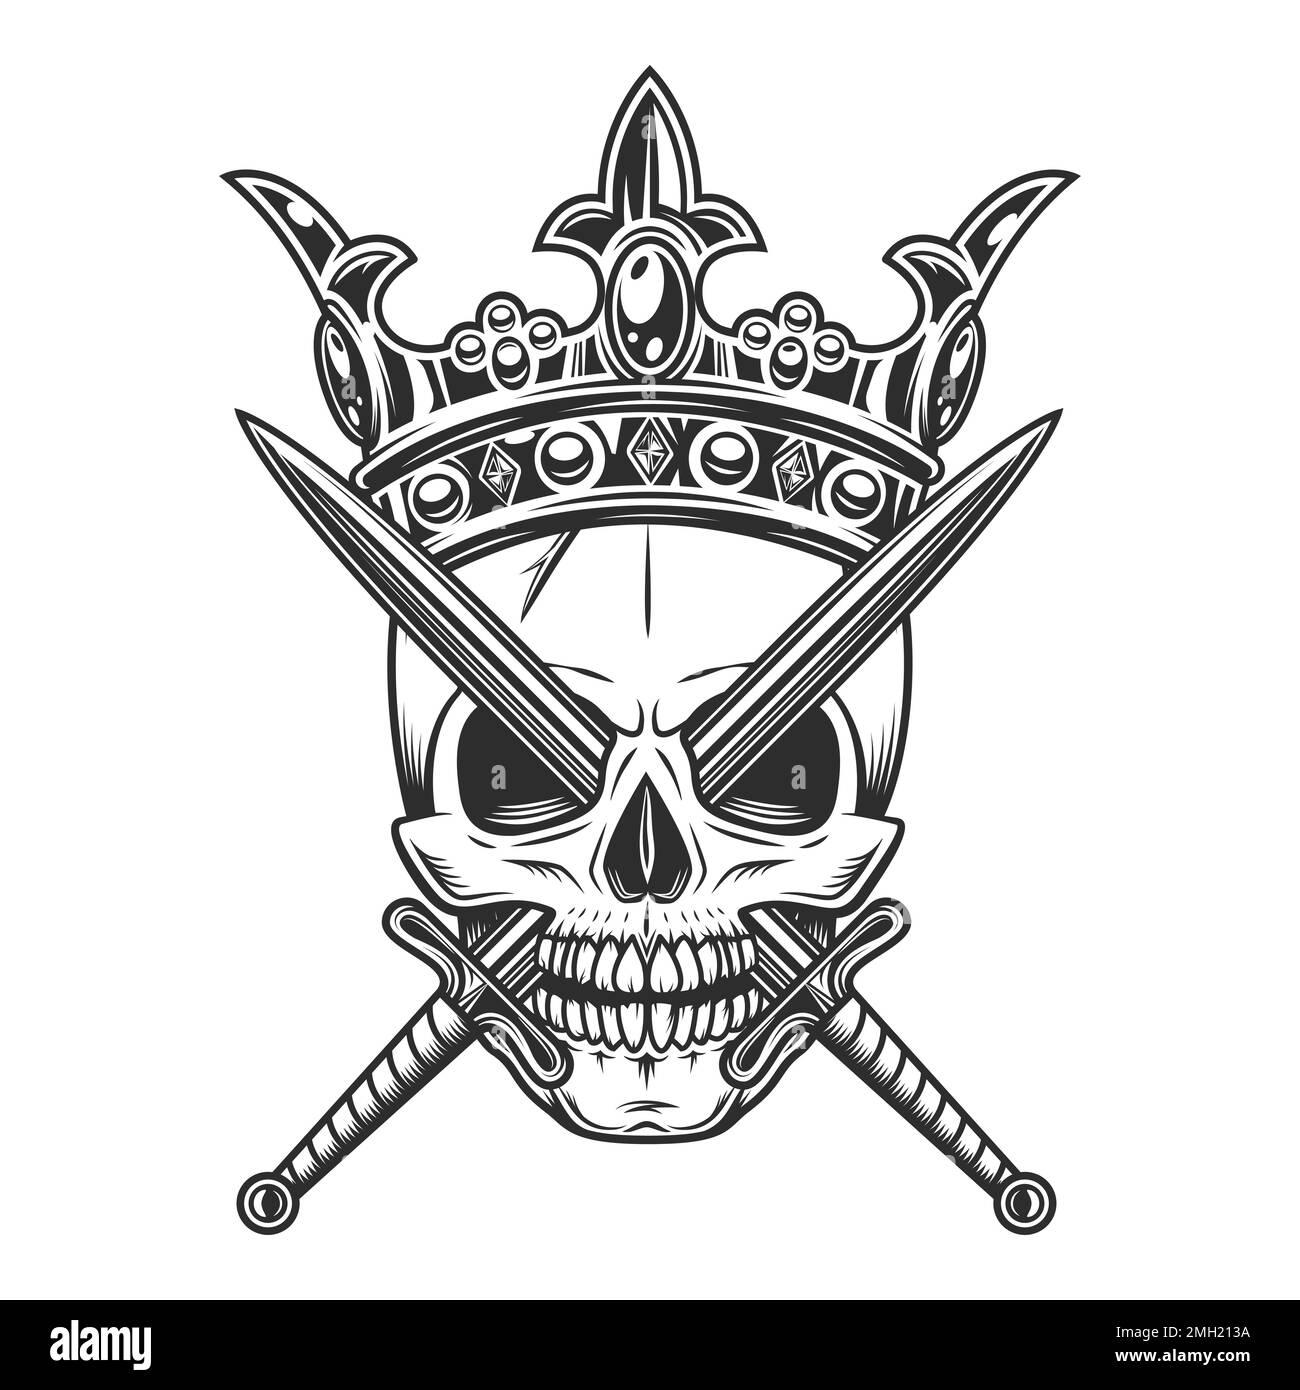 Skull in crown king with crossed swords isolated vector illustration on white background. Vintage crowning, elegant queen or royal king crown Stock Vector